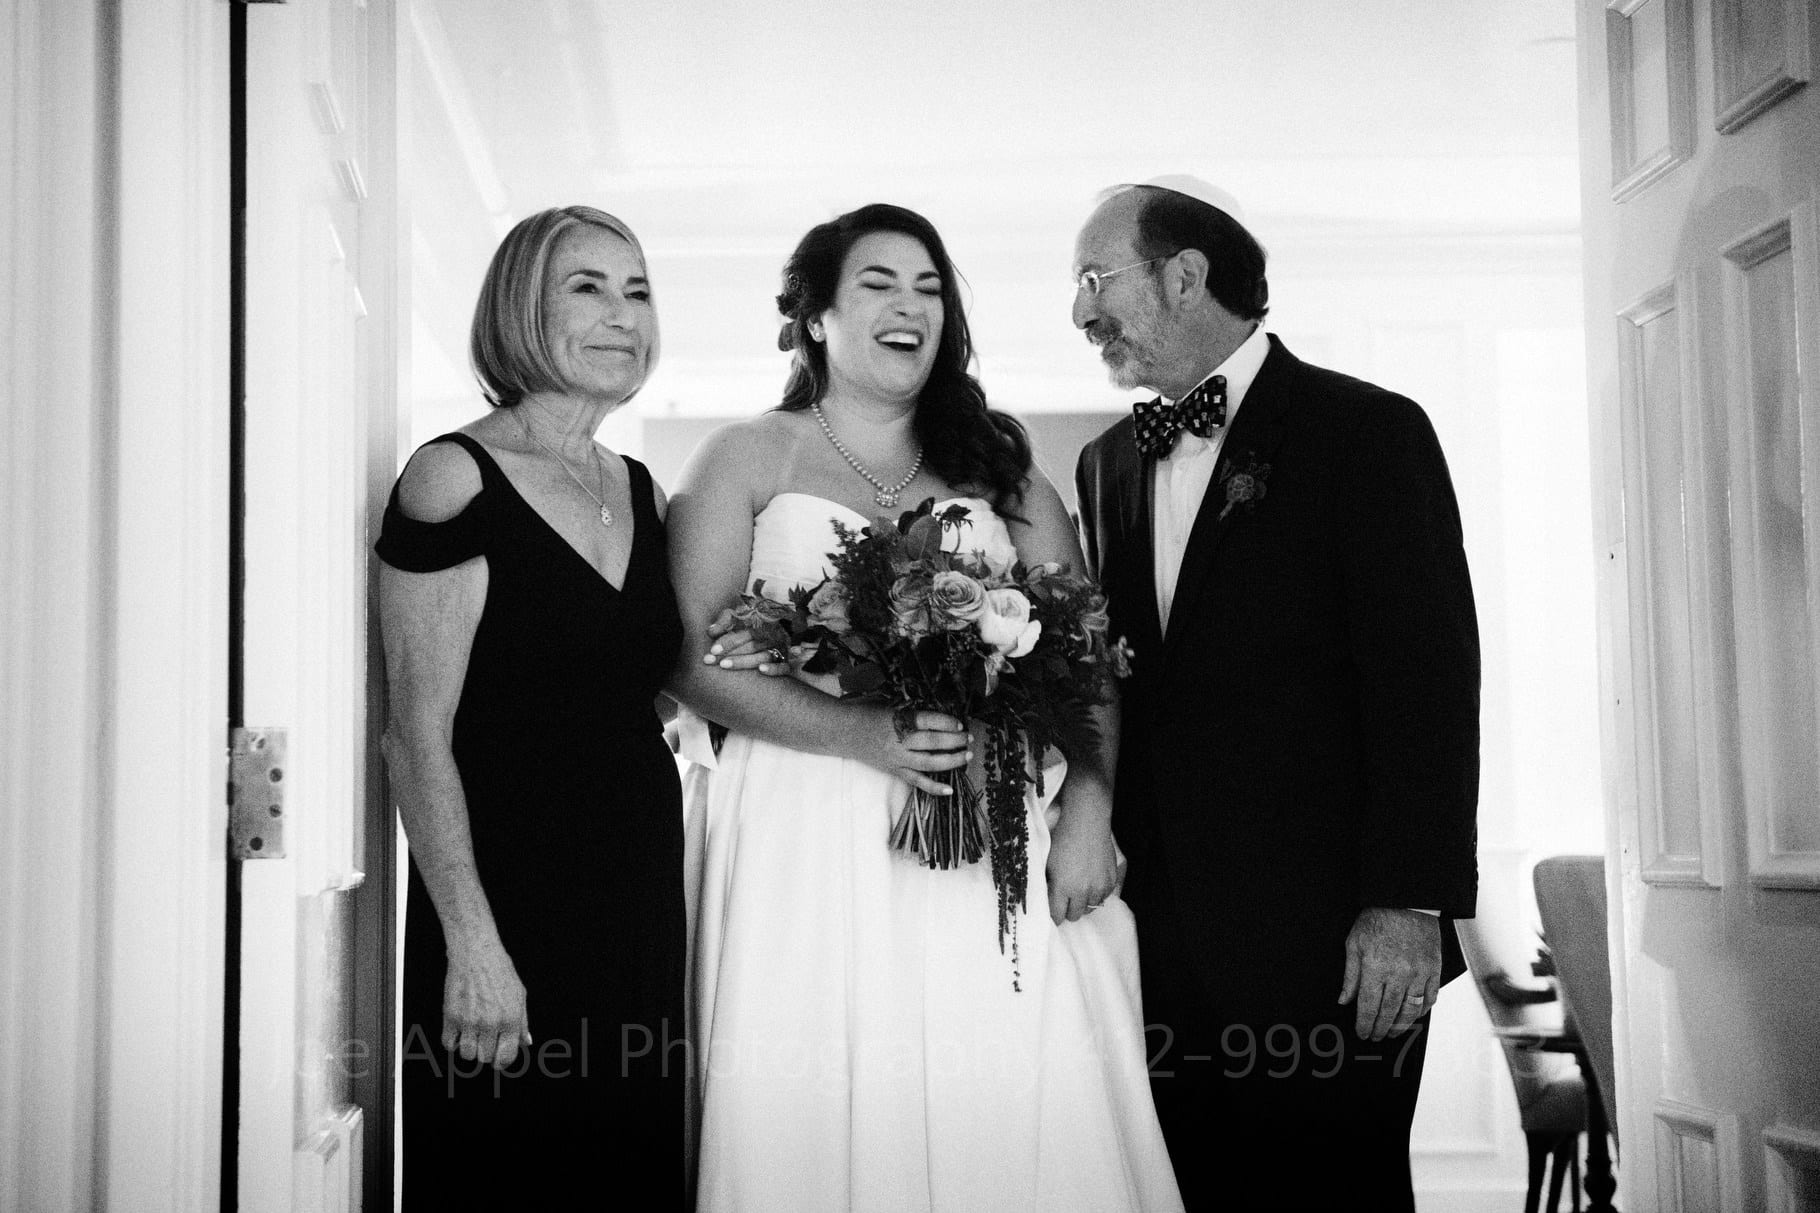 Bride smiles as she stands between her mother and father as they prepare to walk down the aisle at her wedding.